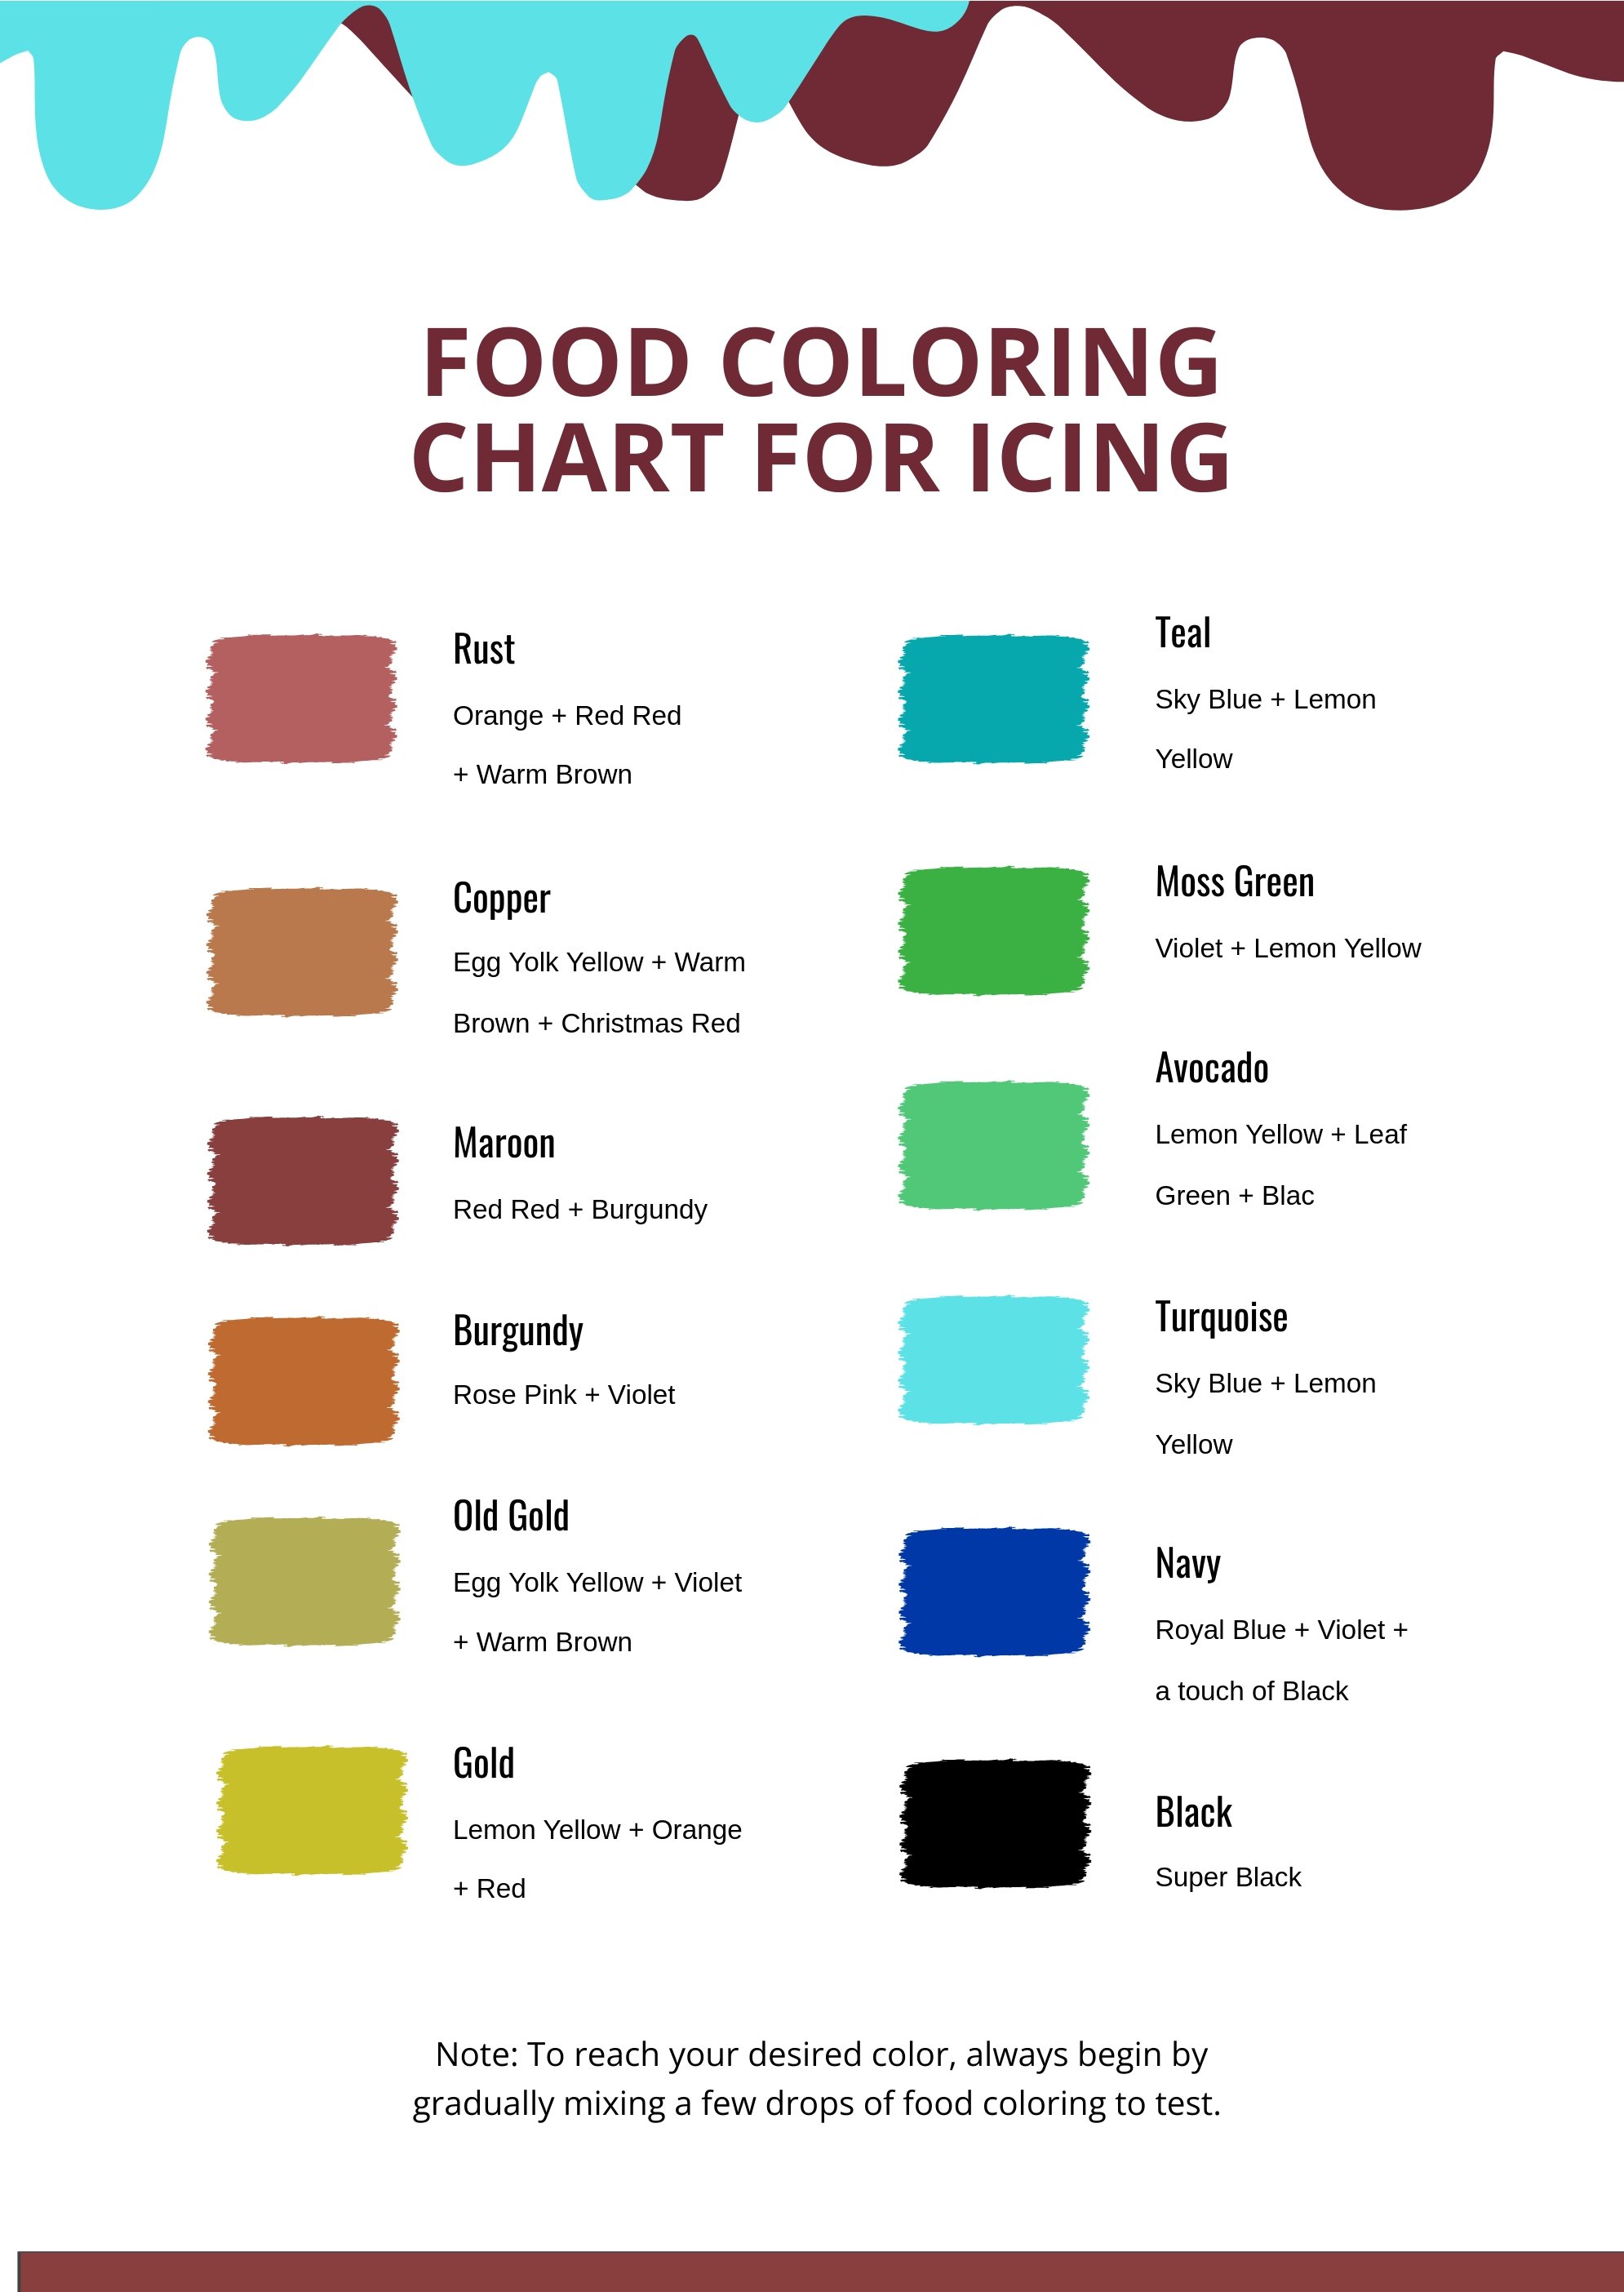 Food Coloring Chart For Icing